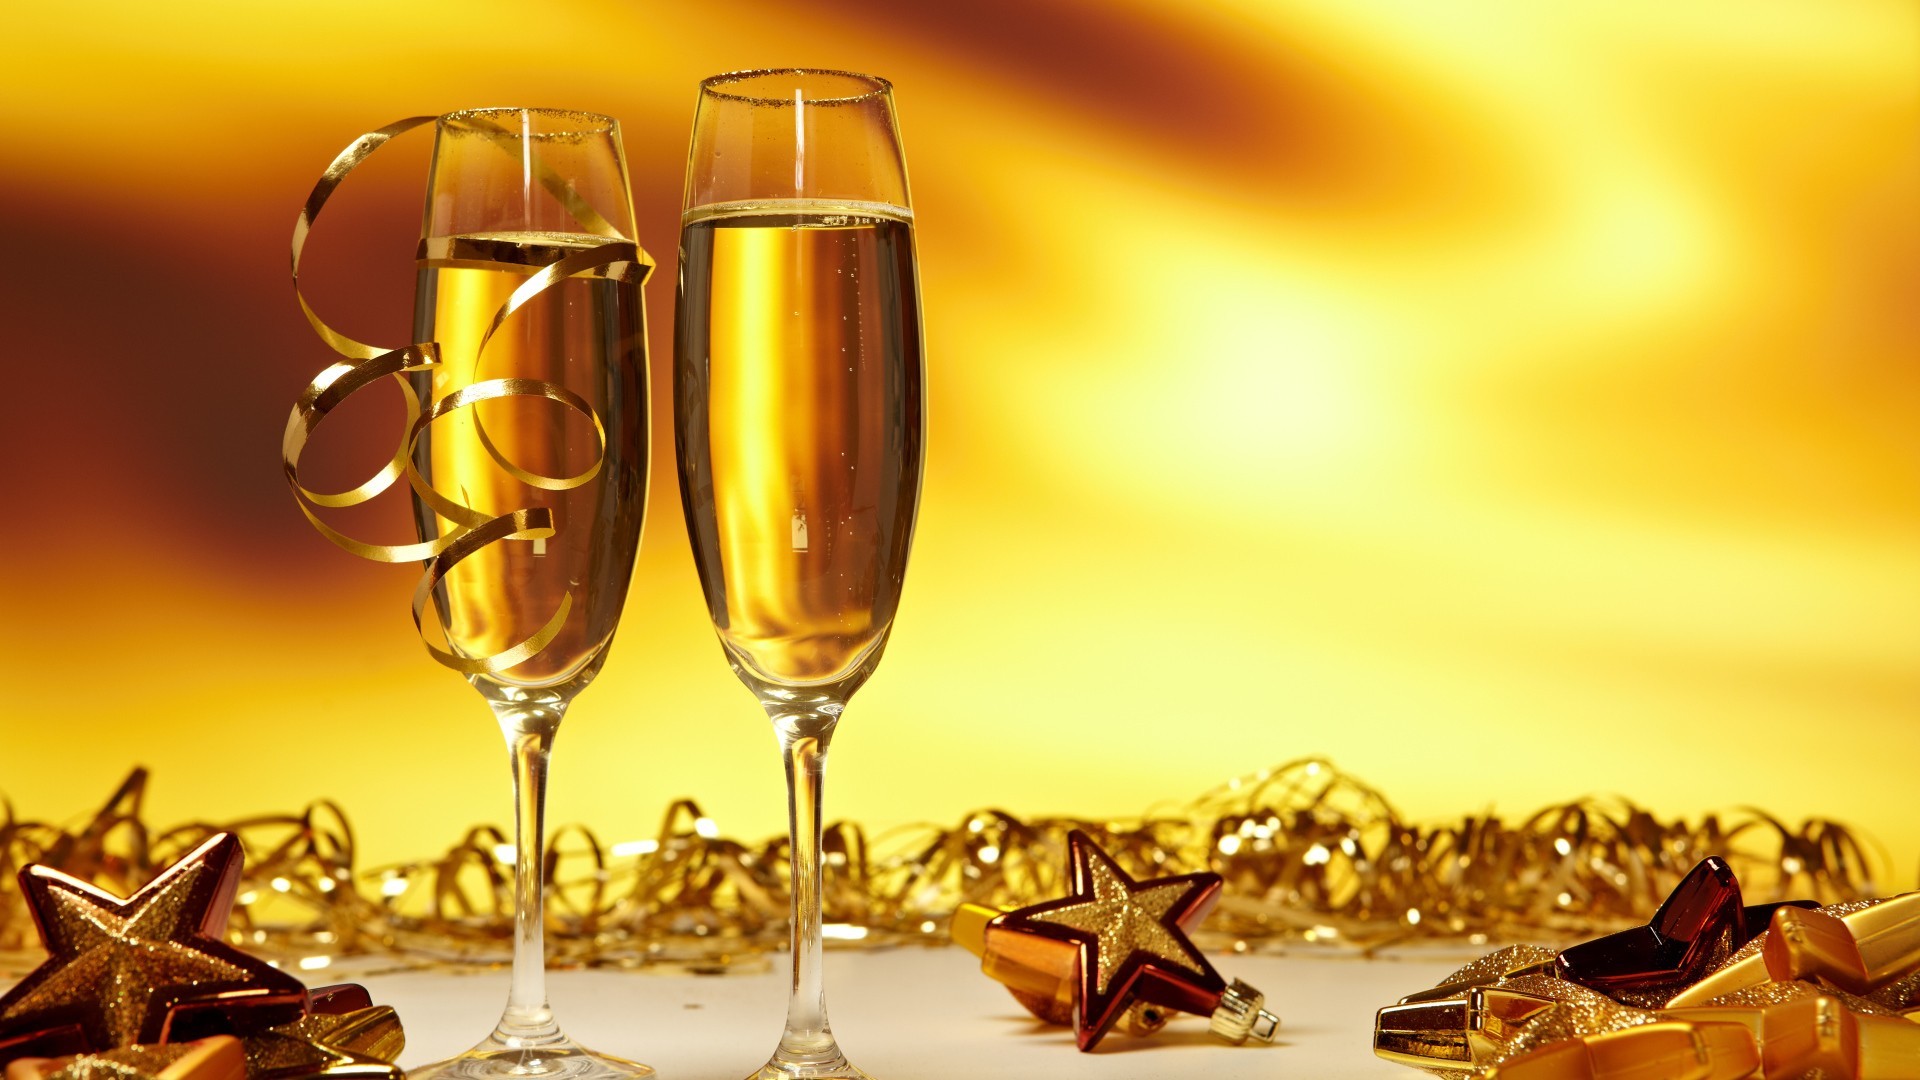 New Year Champagne Wine Glass Drink Celebration Toast - High Resolution Champagne Glasses - HD Wallpaper 